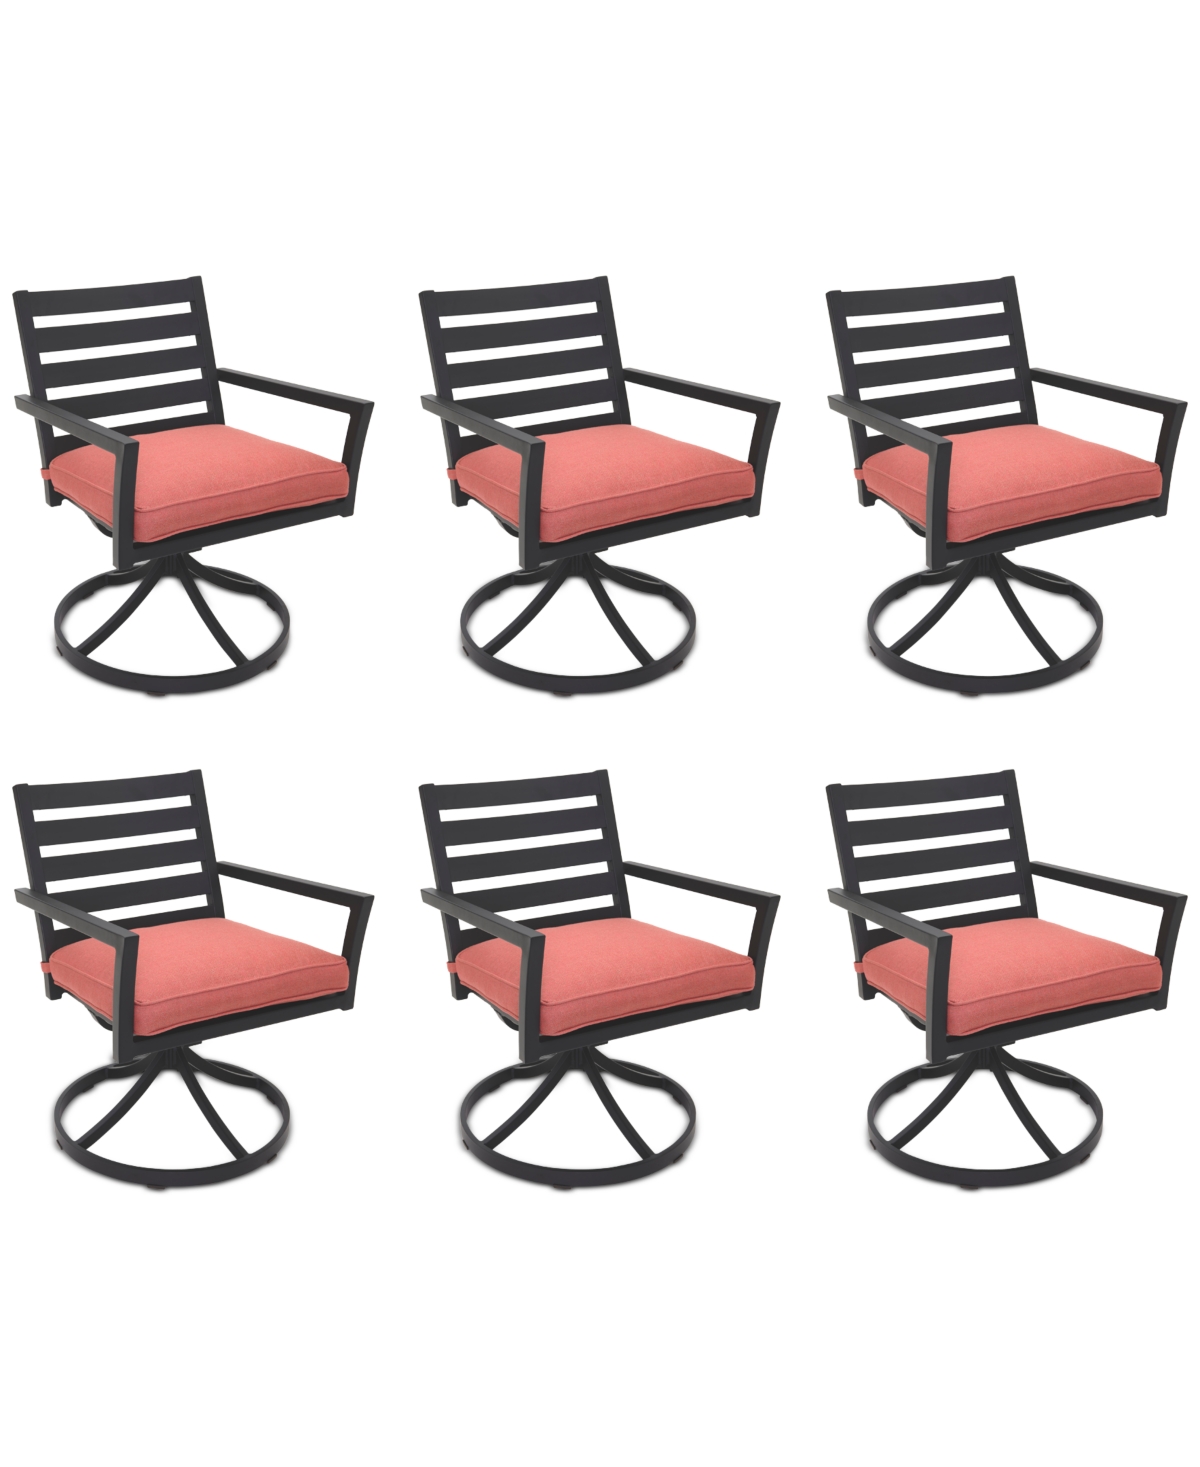 Agio Astaire Outdoor 6-pc Swivel Chair Bundle Set In Peony Brick Red